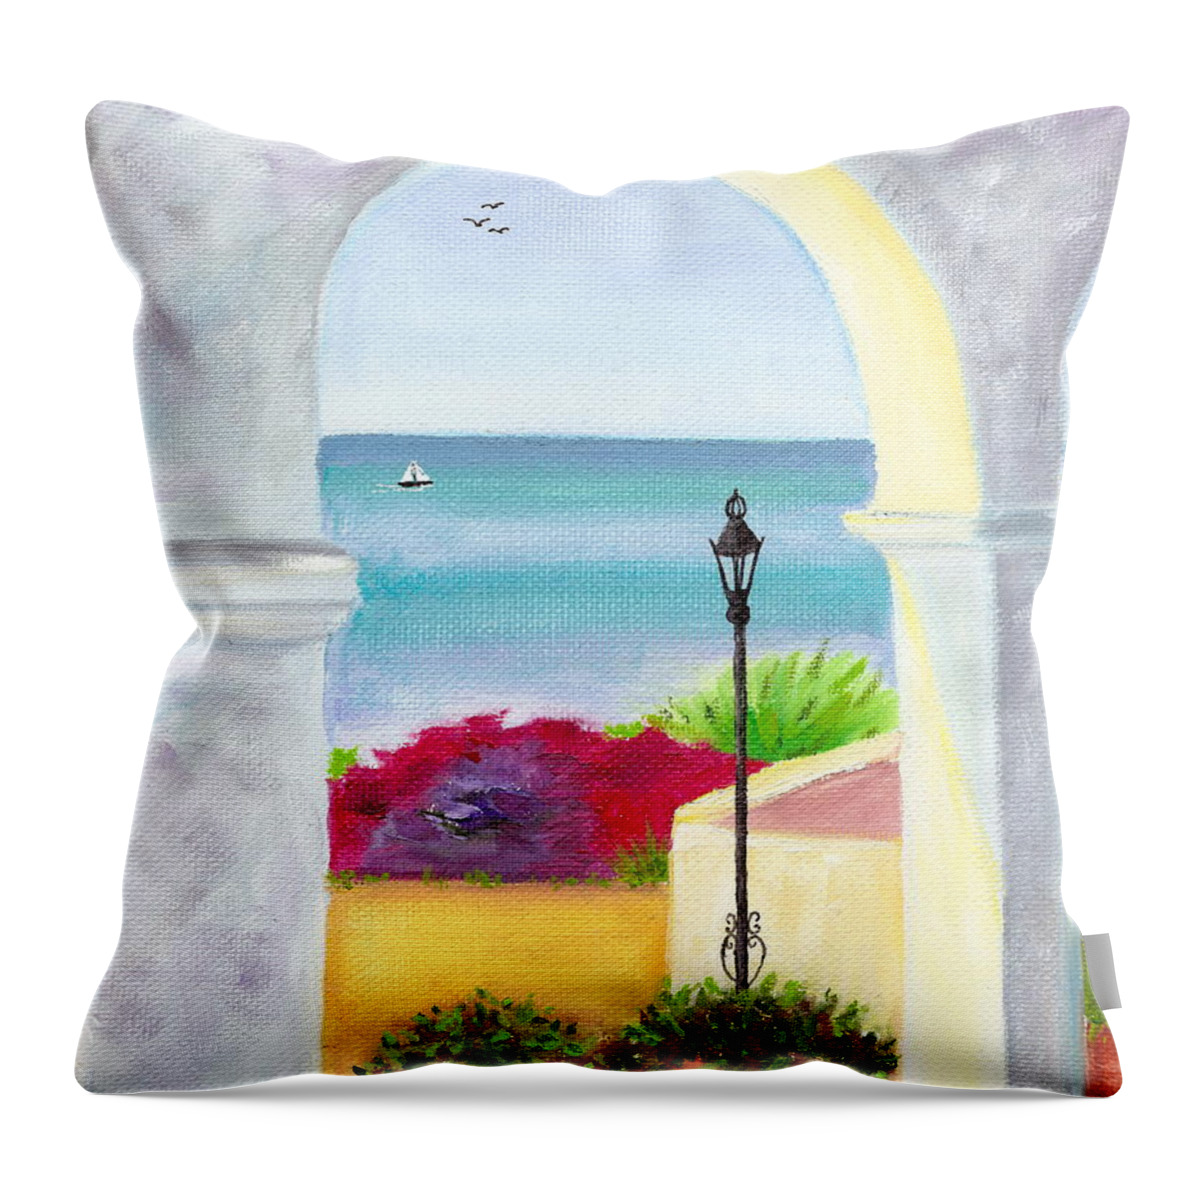 Water Throw Pillow featuring the painting Casa Romantica View by Mary Scott